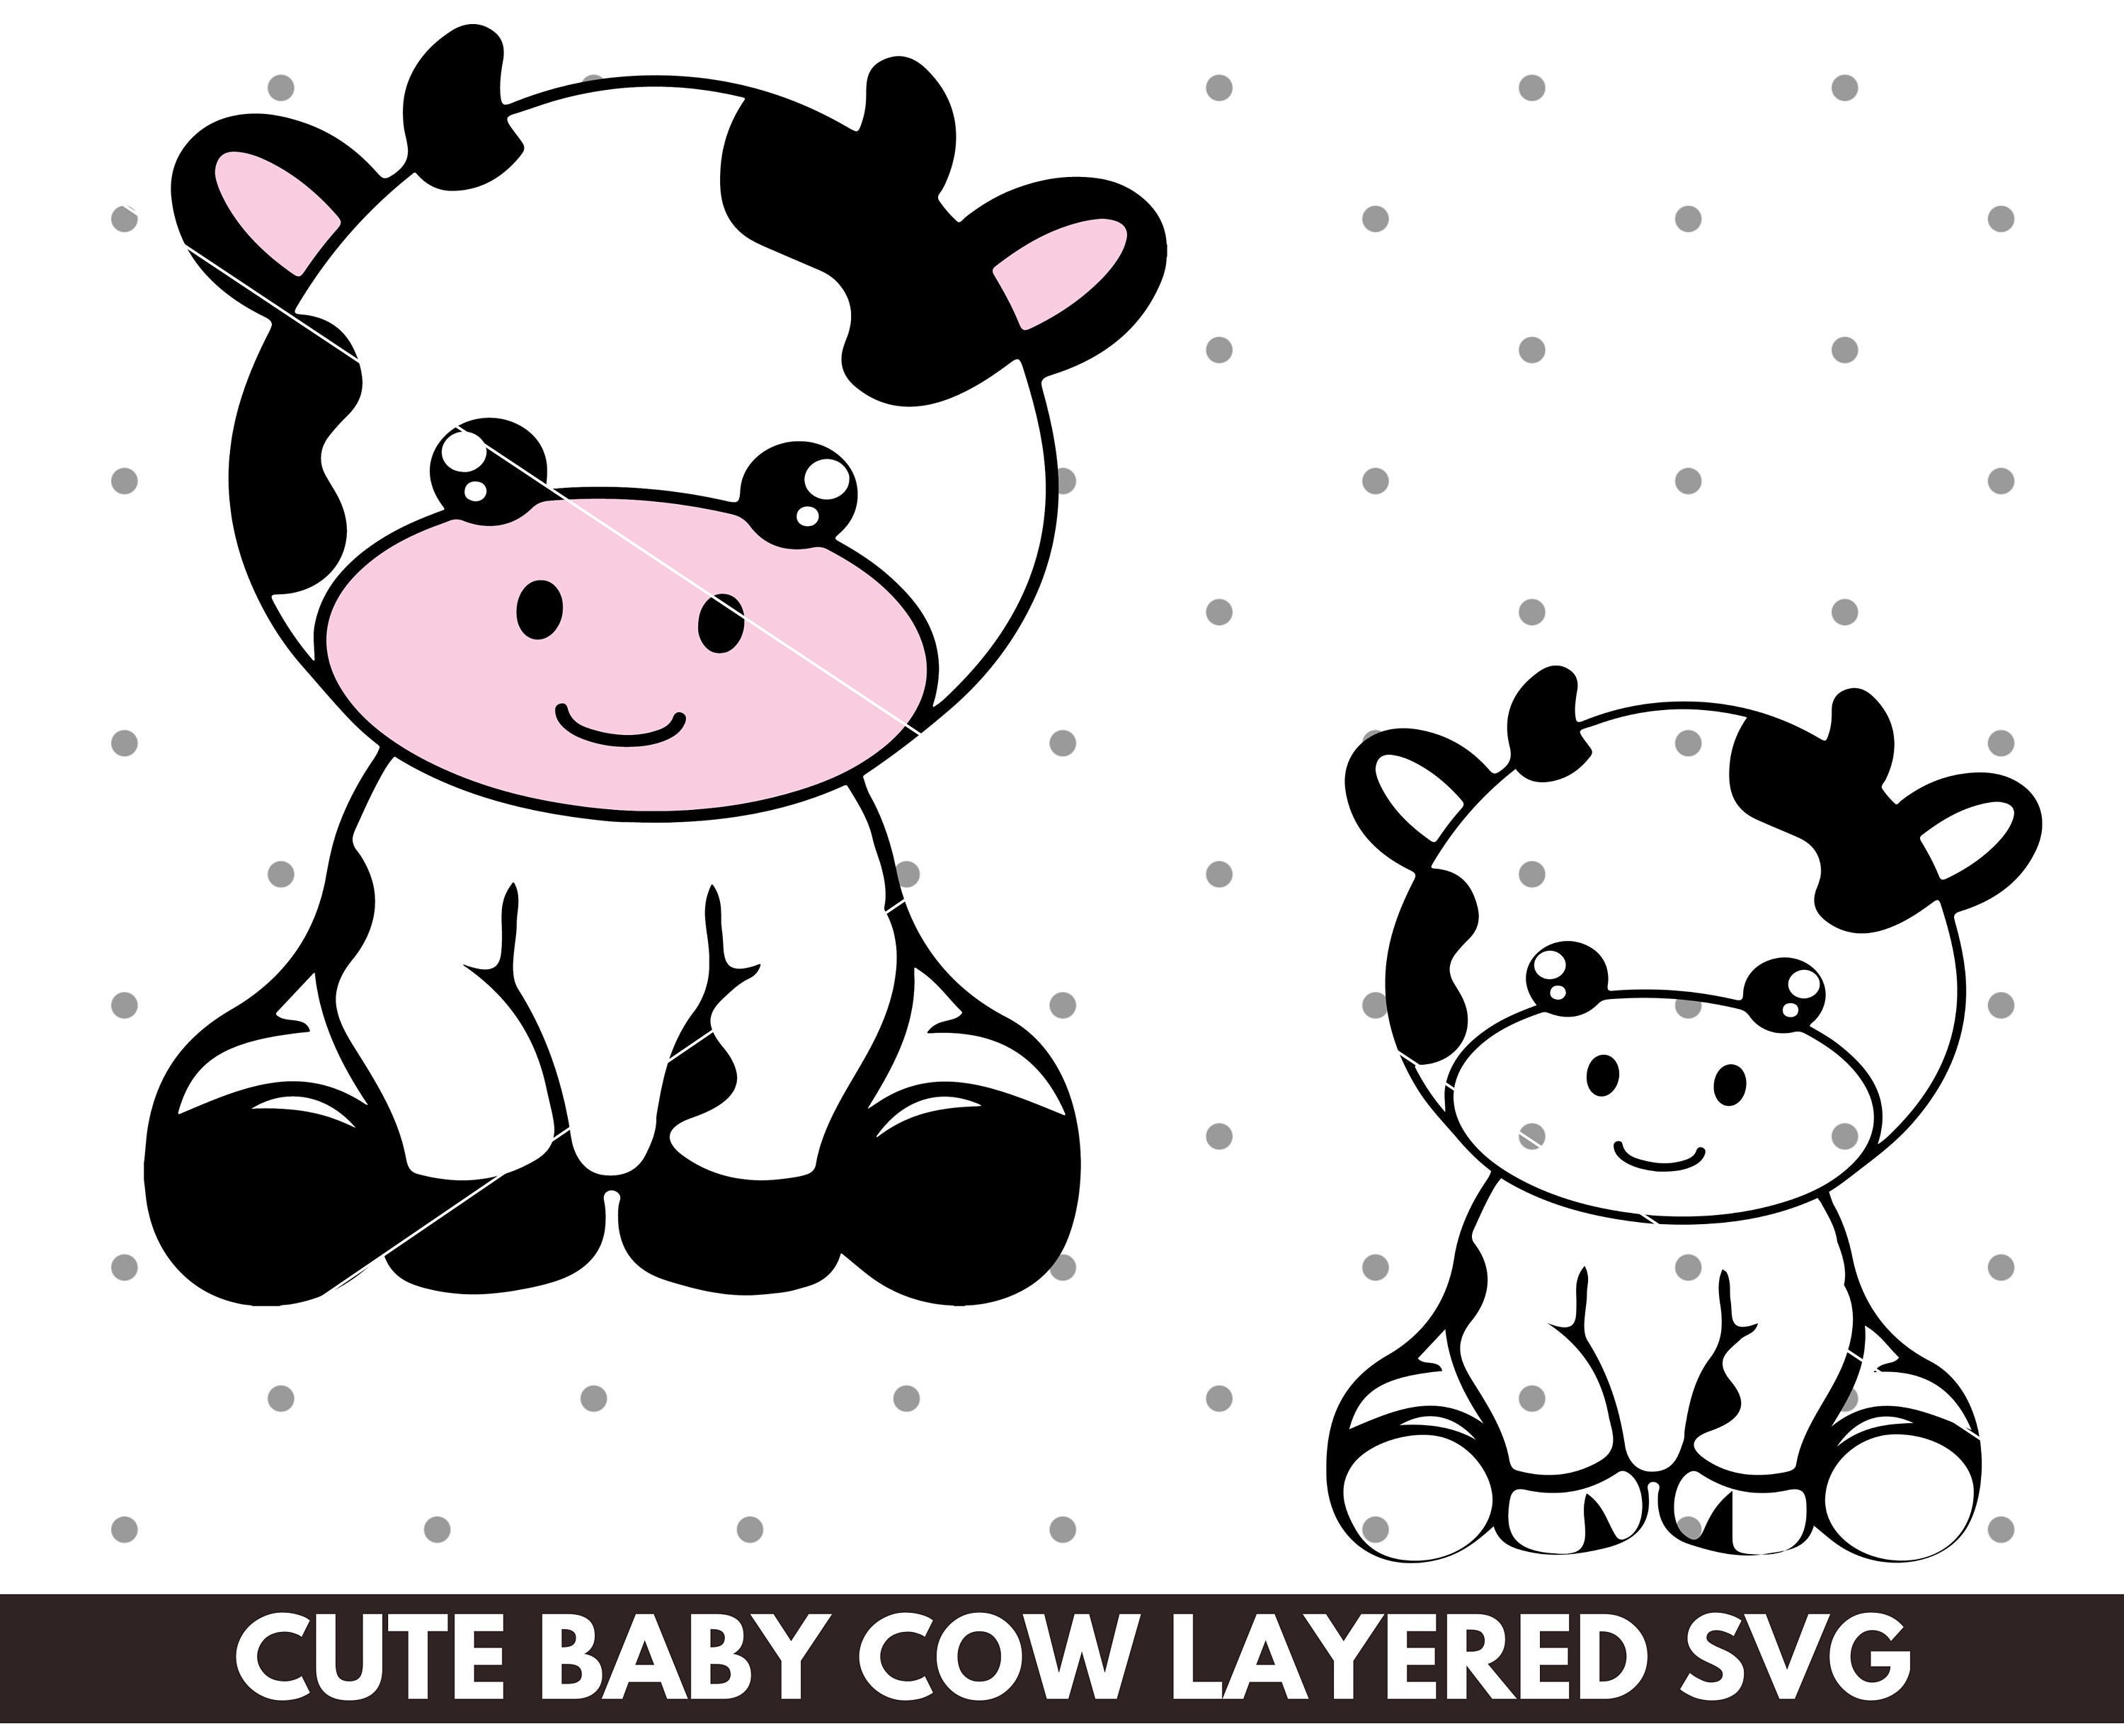 Cute cow cartoon character. Chinese New Year | Stock vector | Colourbox